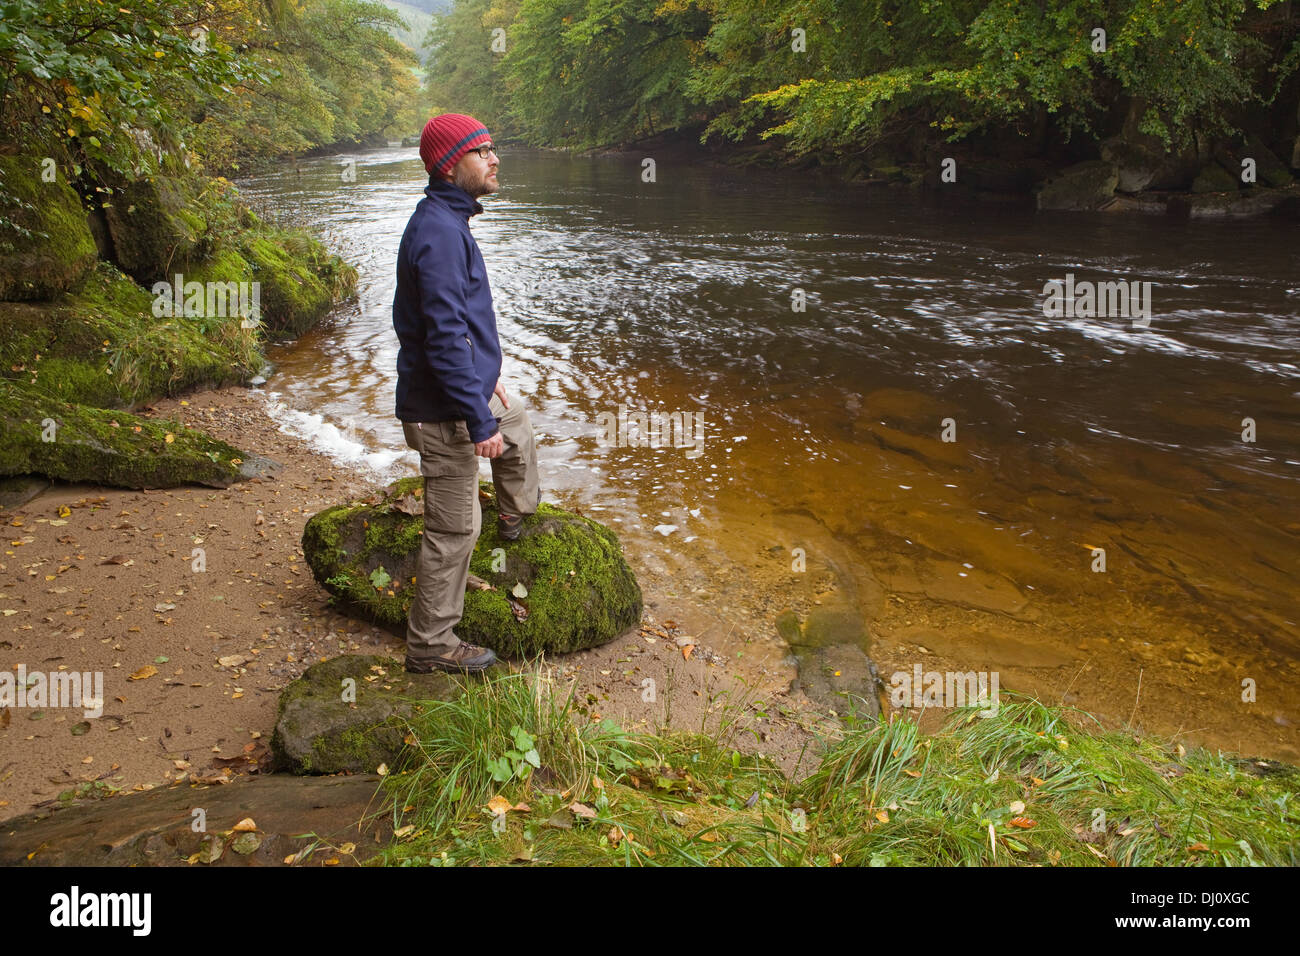 Haugh Wood and the River Wharfe, Wharfedale, Yorkshire Dales National Park, England, UK. October 2013. Stock Photo